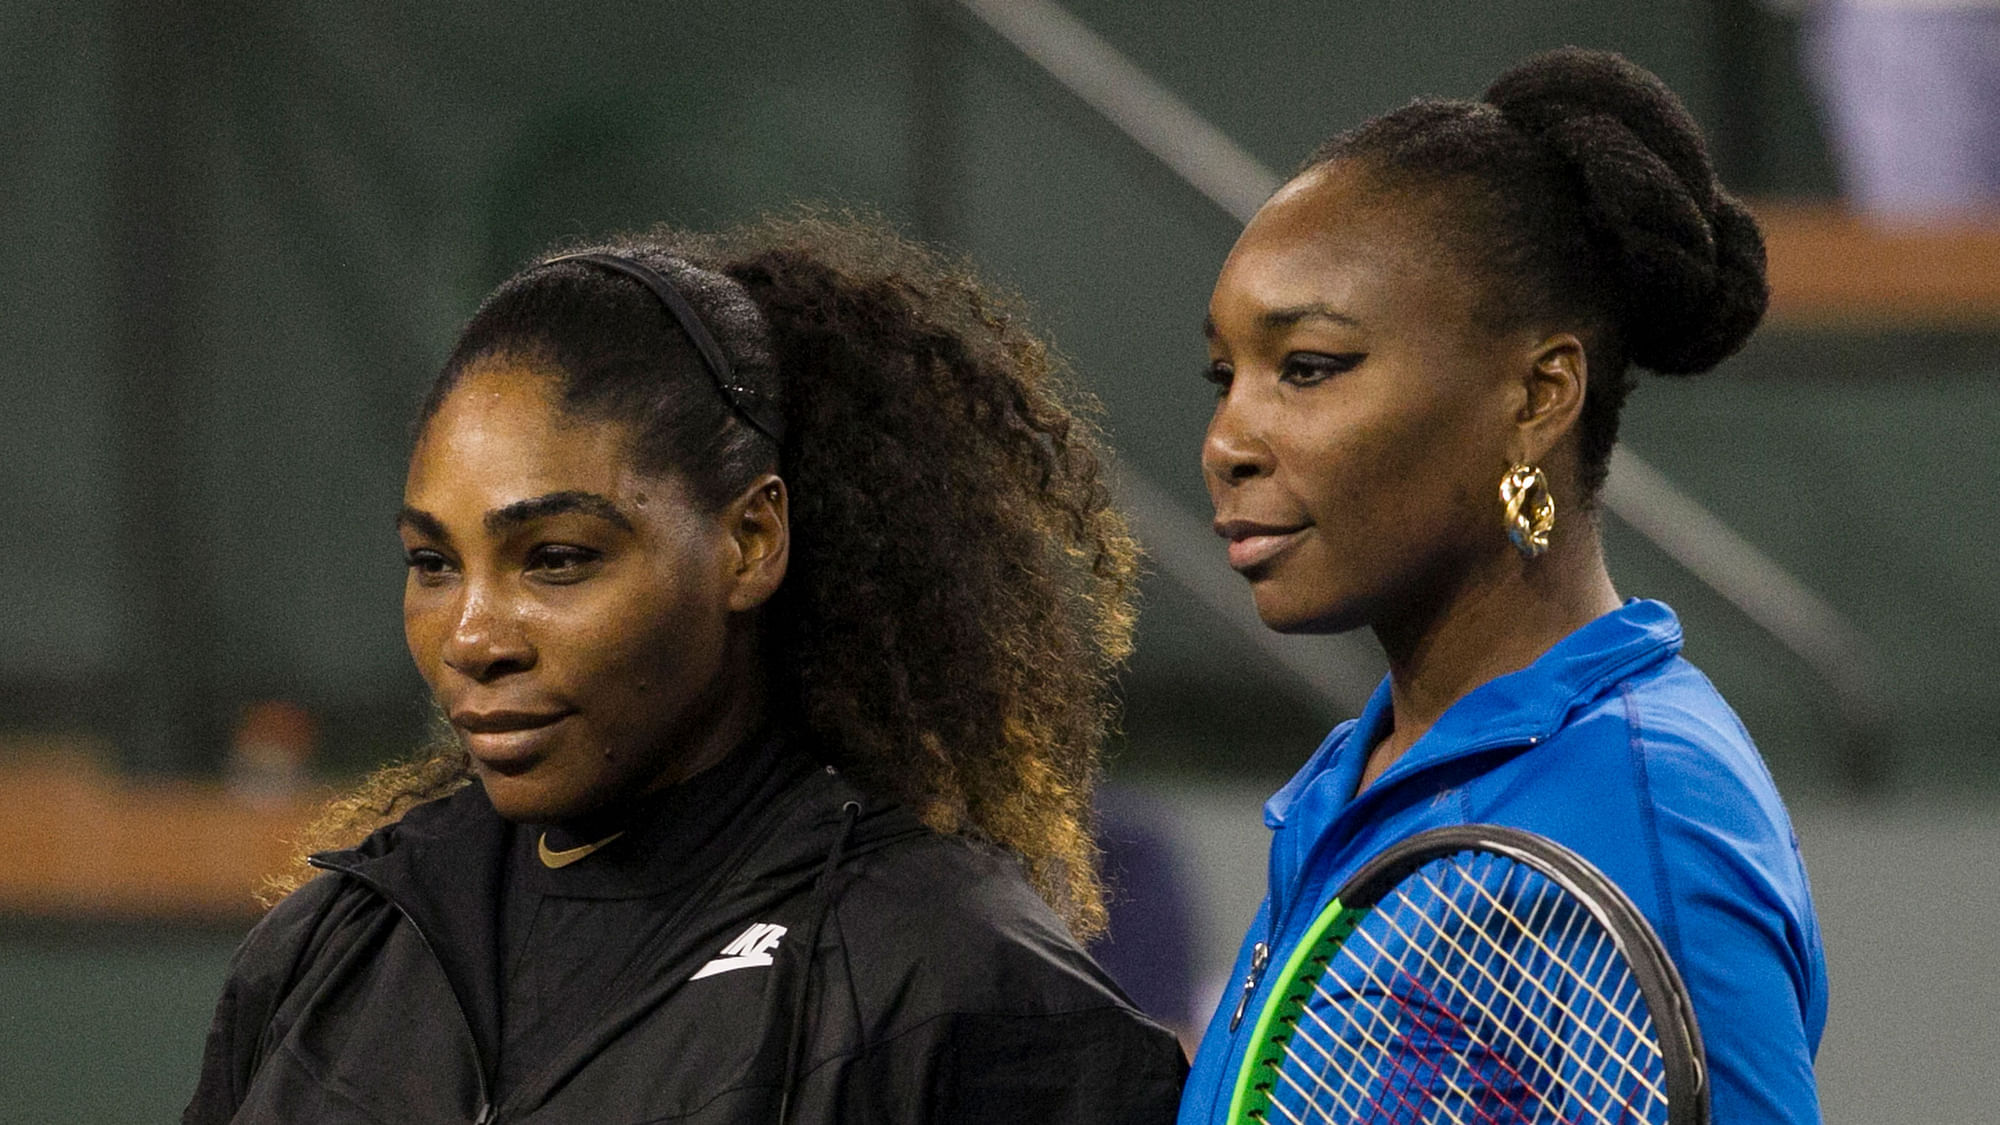 In their last match in Rome, Venus Williams beat Serena in their second career meeting way back in the 1998 quarterfinals.